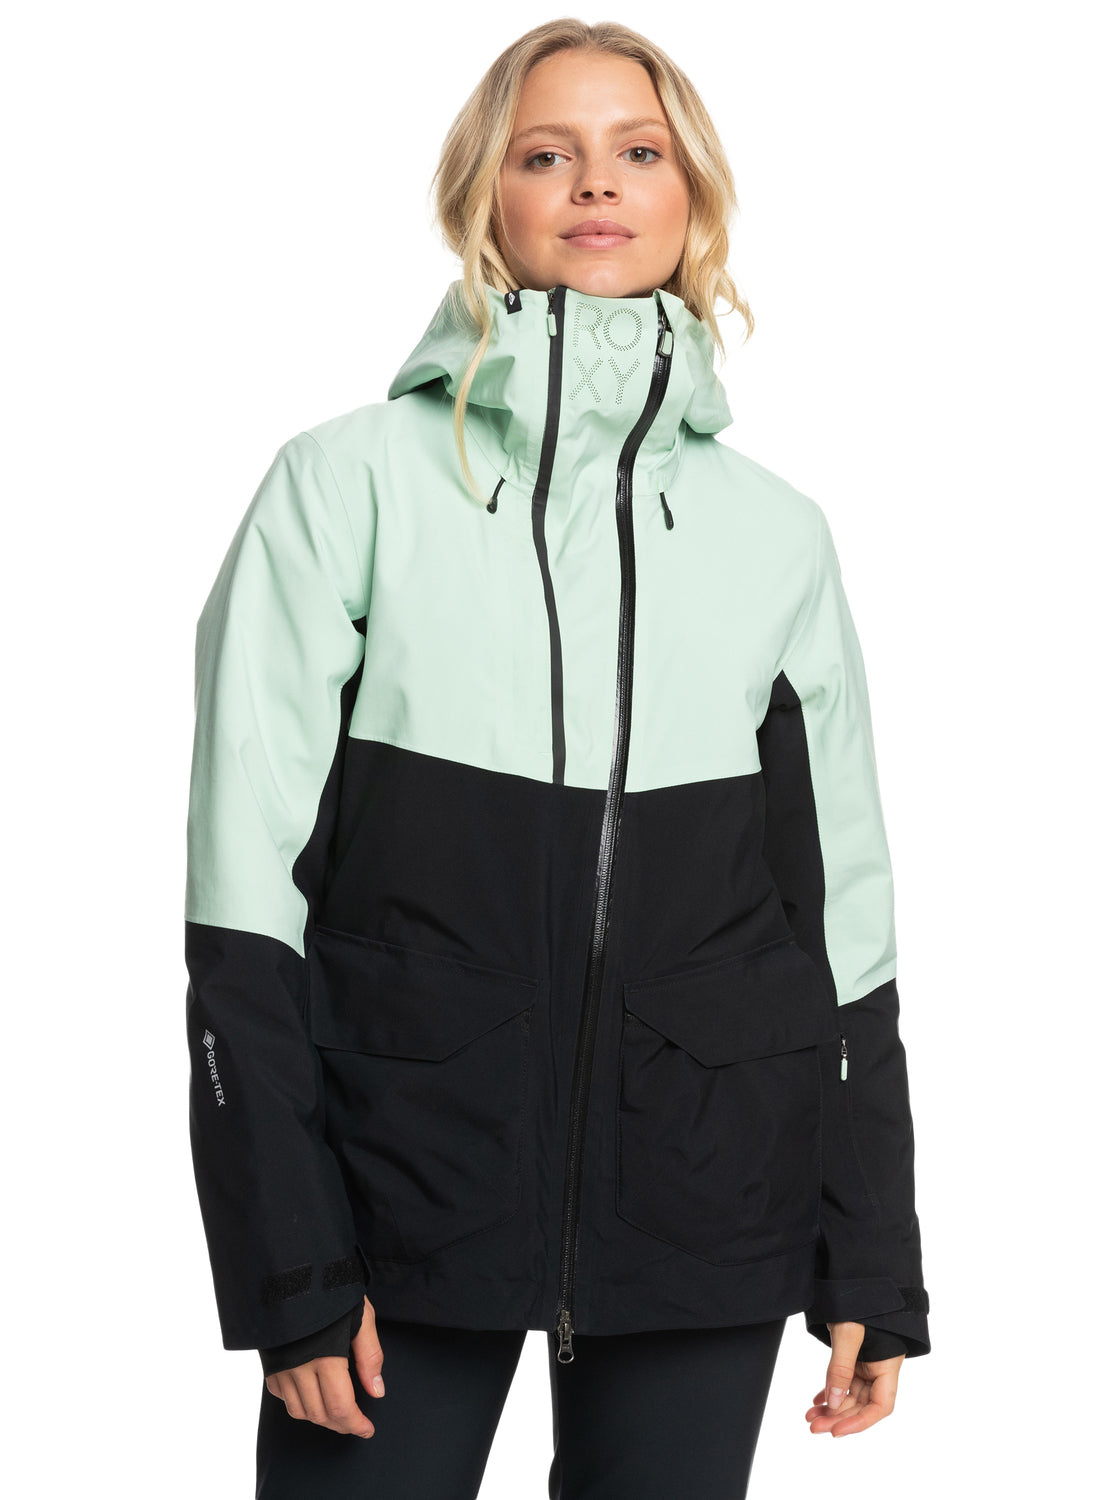 Womens GORE-TEX Stretch Purelines Technical Snow Jacket